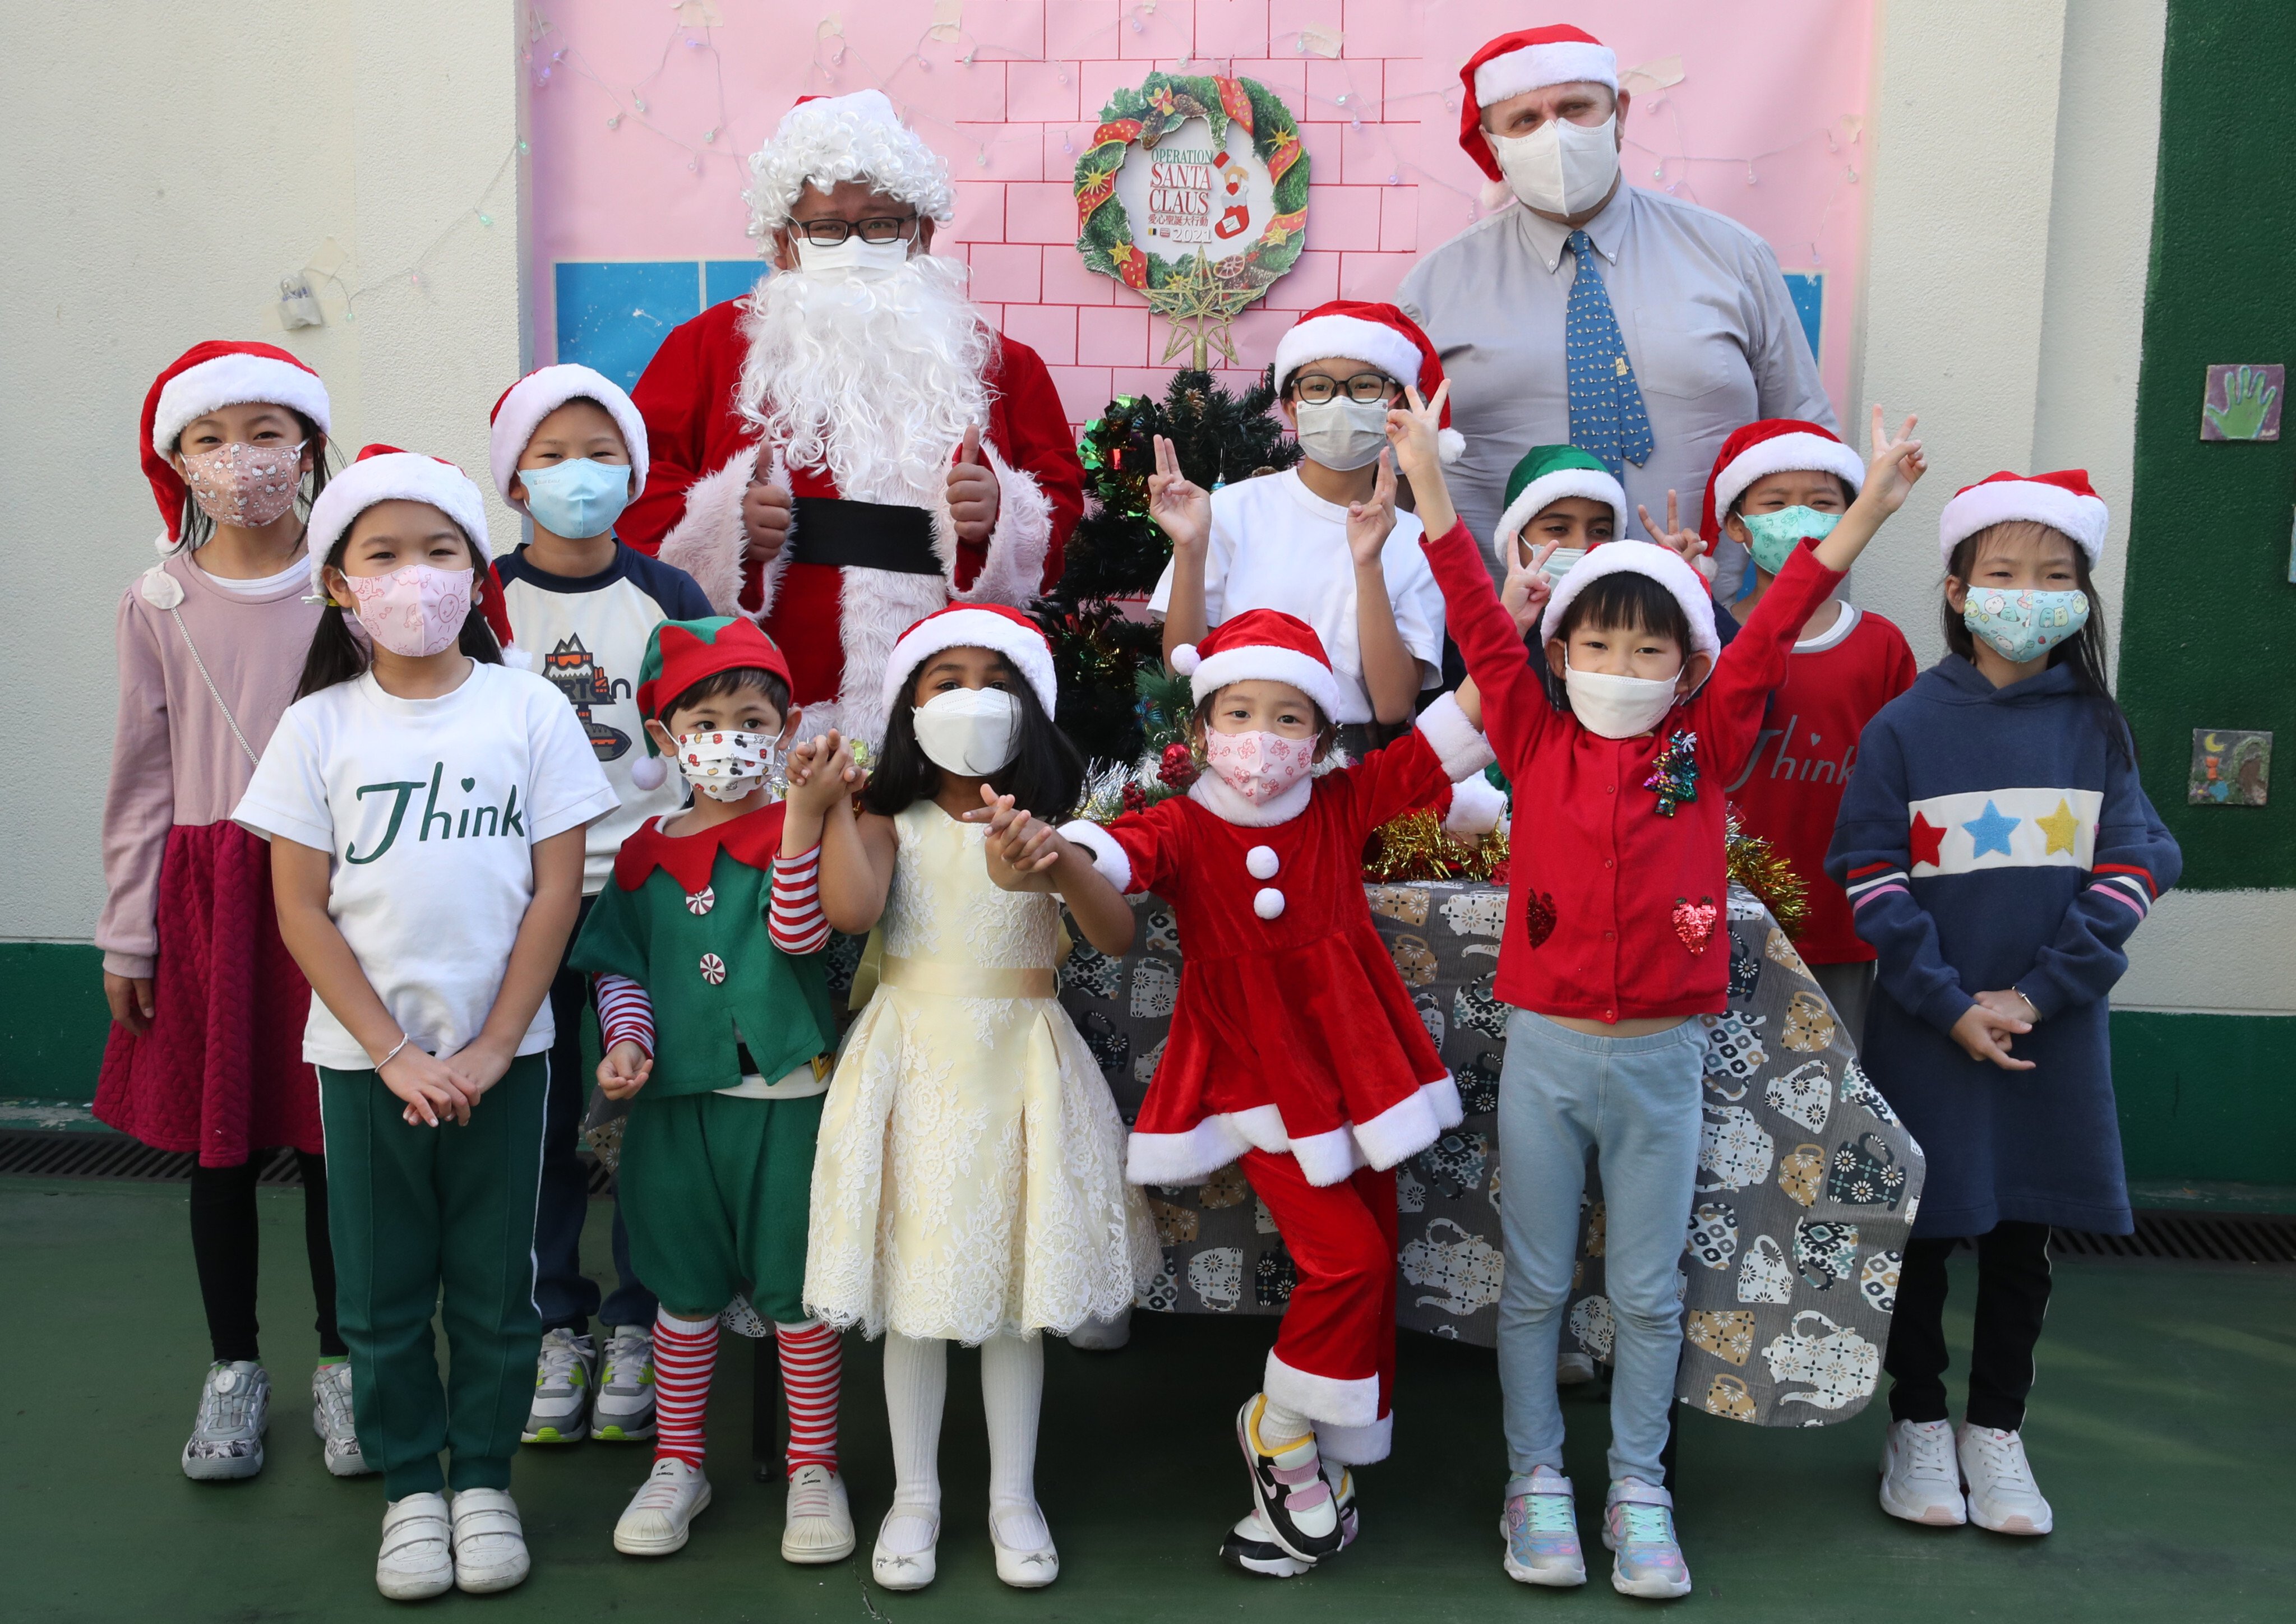 Santa with Robert Burns (back right), Think International School’s head of primary, and pupils. Photo: Edmond So